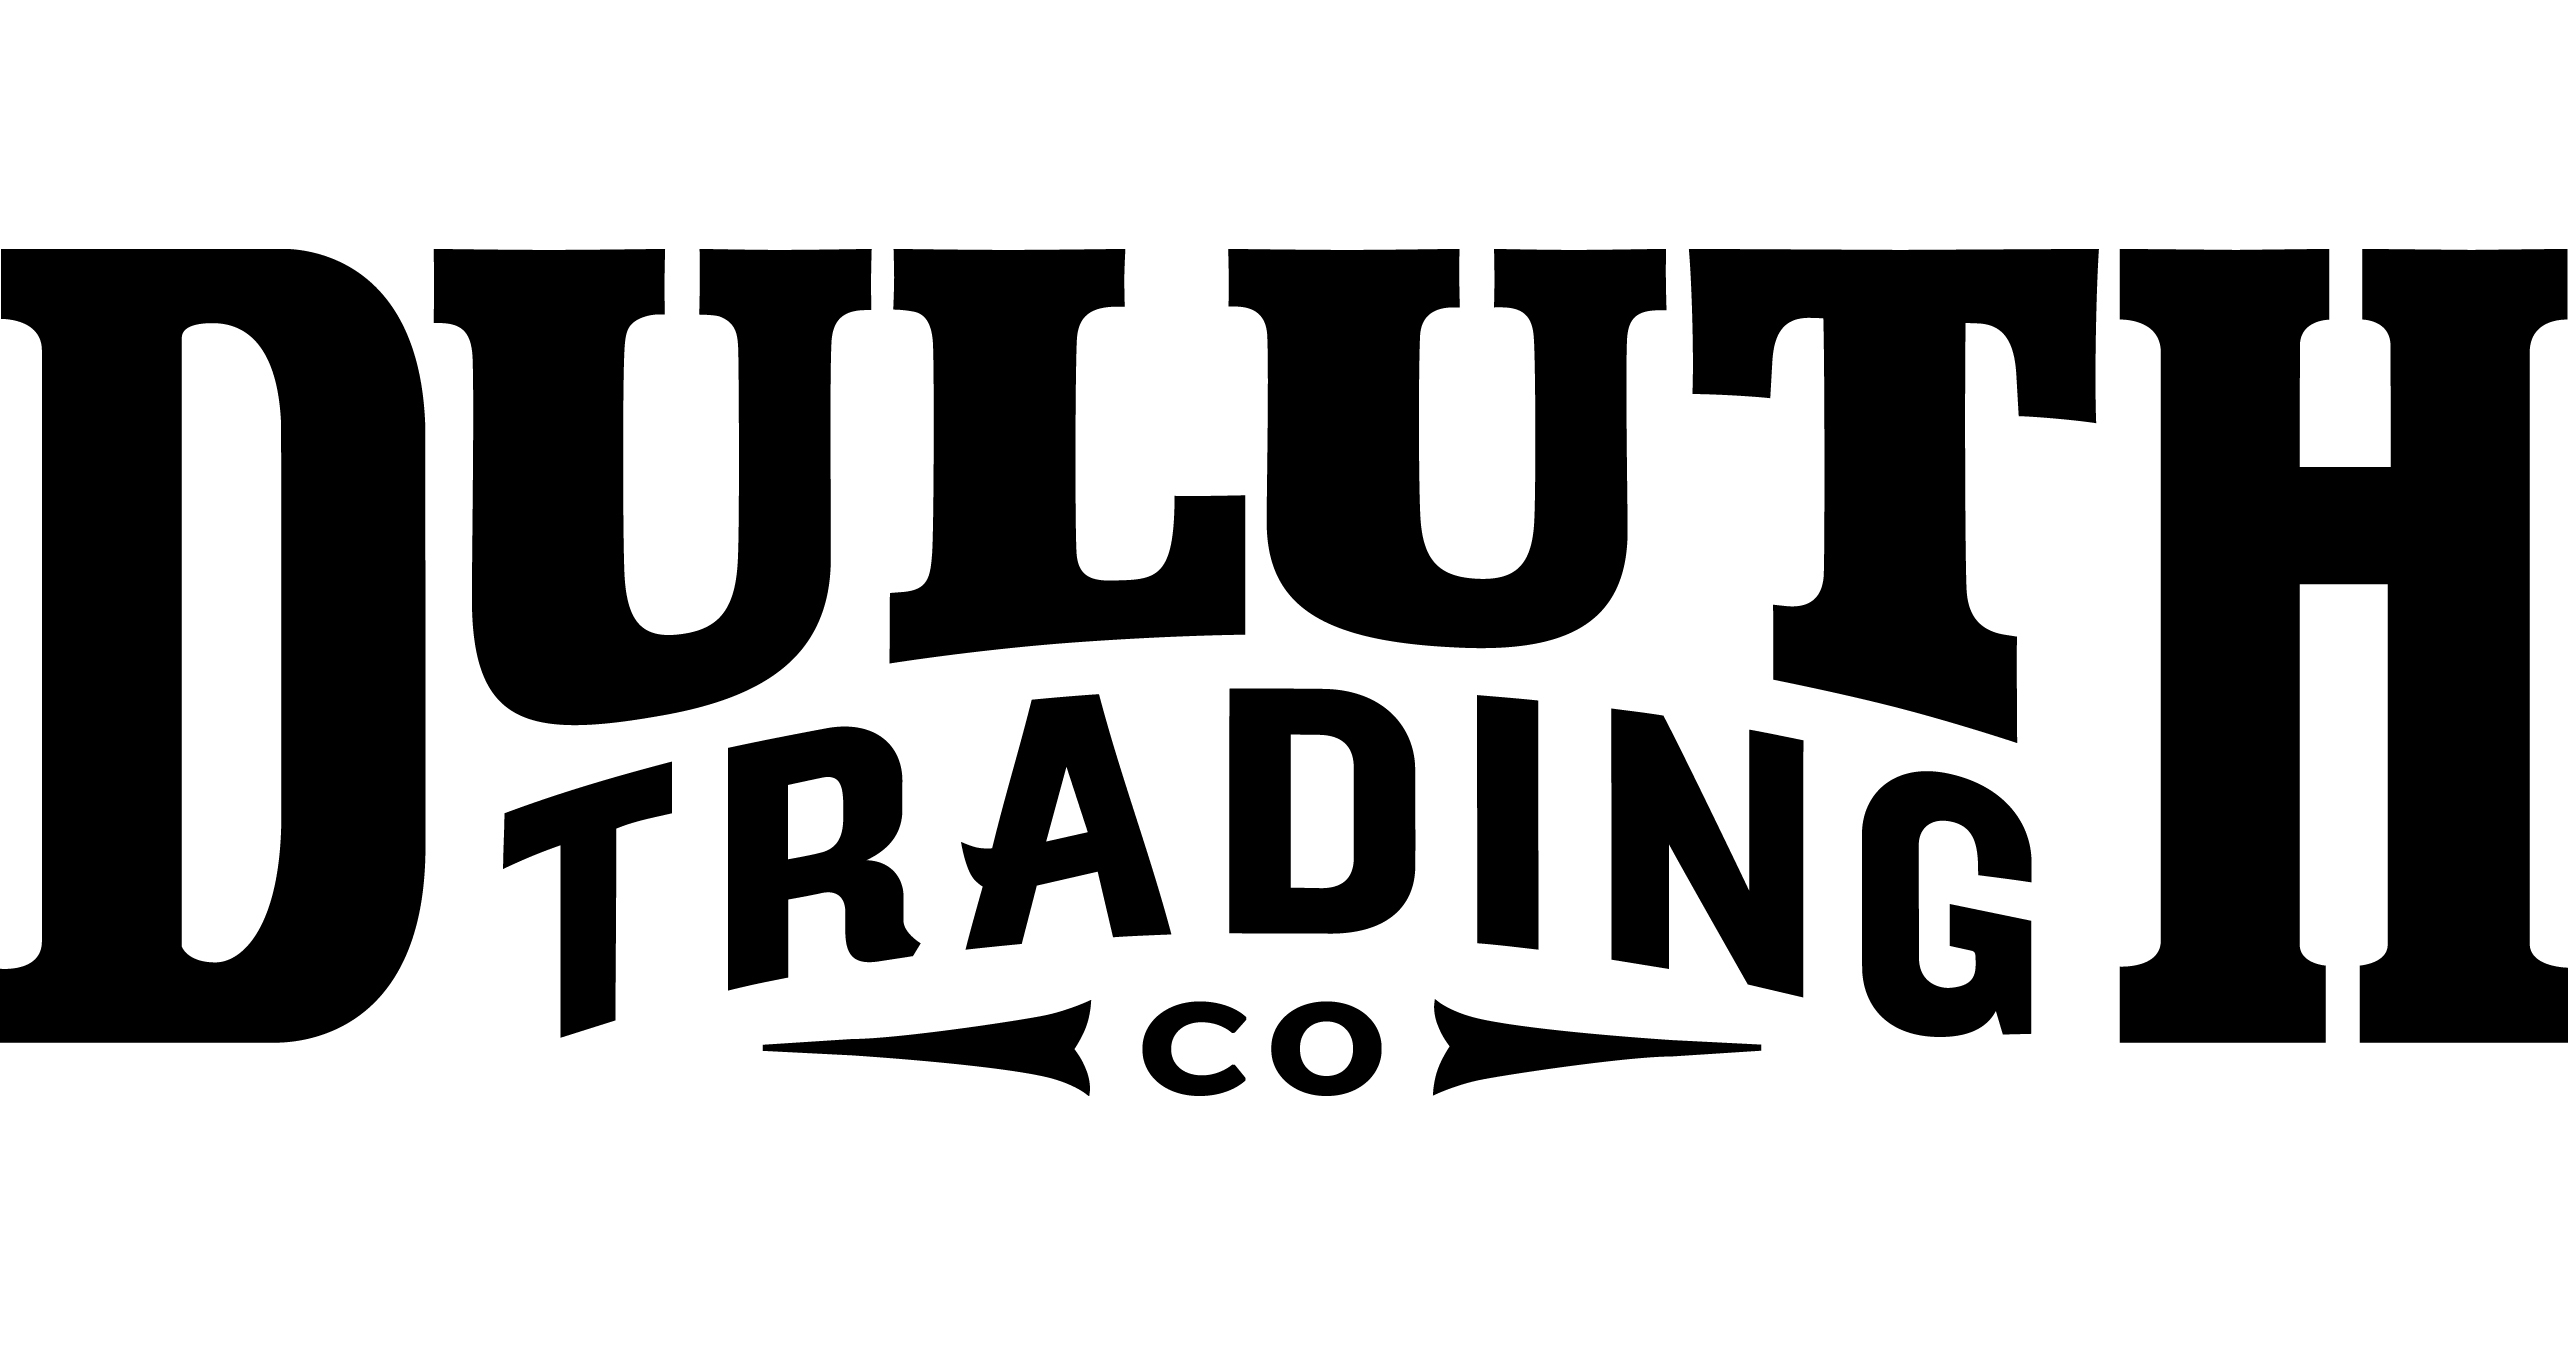 Make Merry Monumental This Year with Duluth Trading Co's Holiday